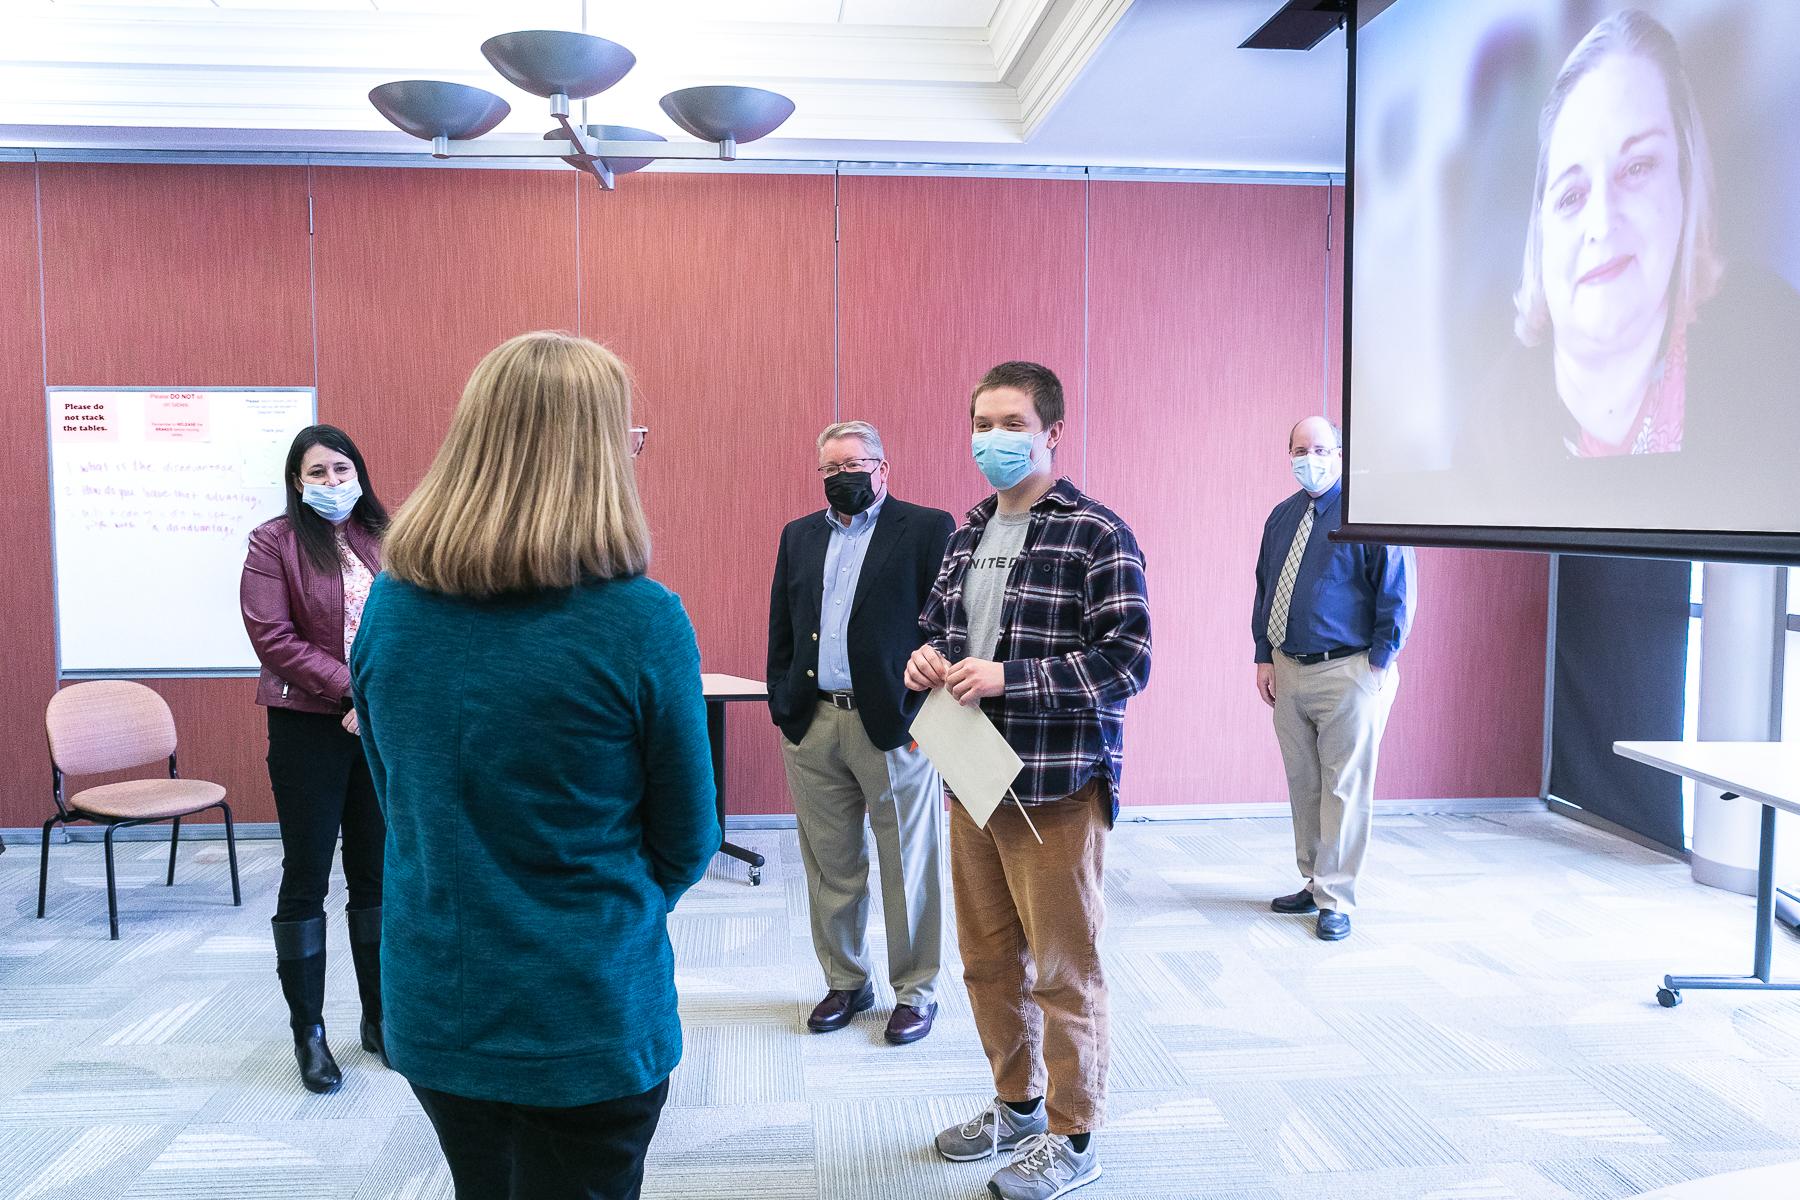 Samuel Province (middle, plaid shirt) speaks with Nancy Murphy, financial aid counselor. He holds a certificate announcing his scholarship. The donor for whom the scholarship is named, Carolyn Kollmeier '74, joined by Zoom and is shown on a screen on the right side of the image.